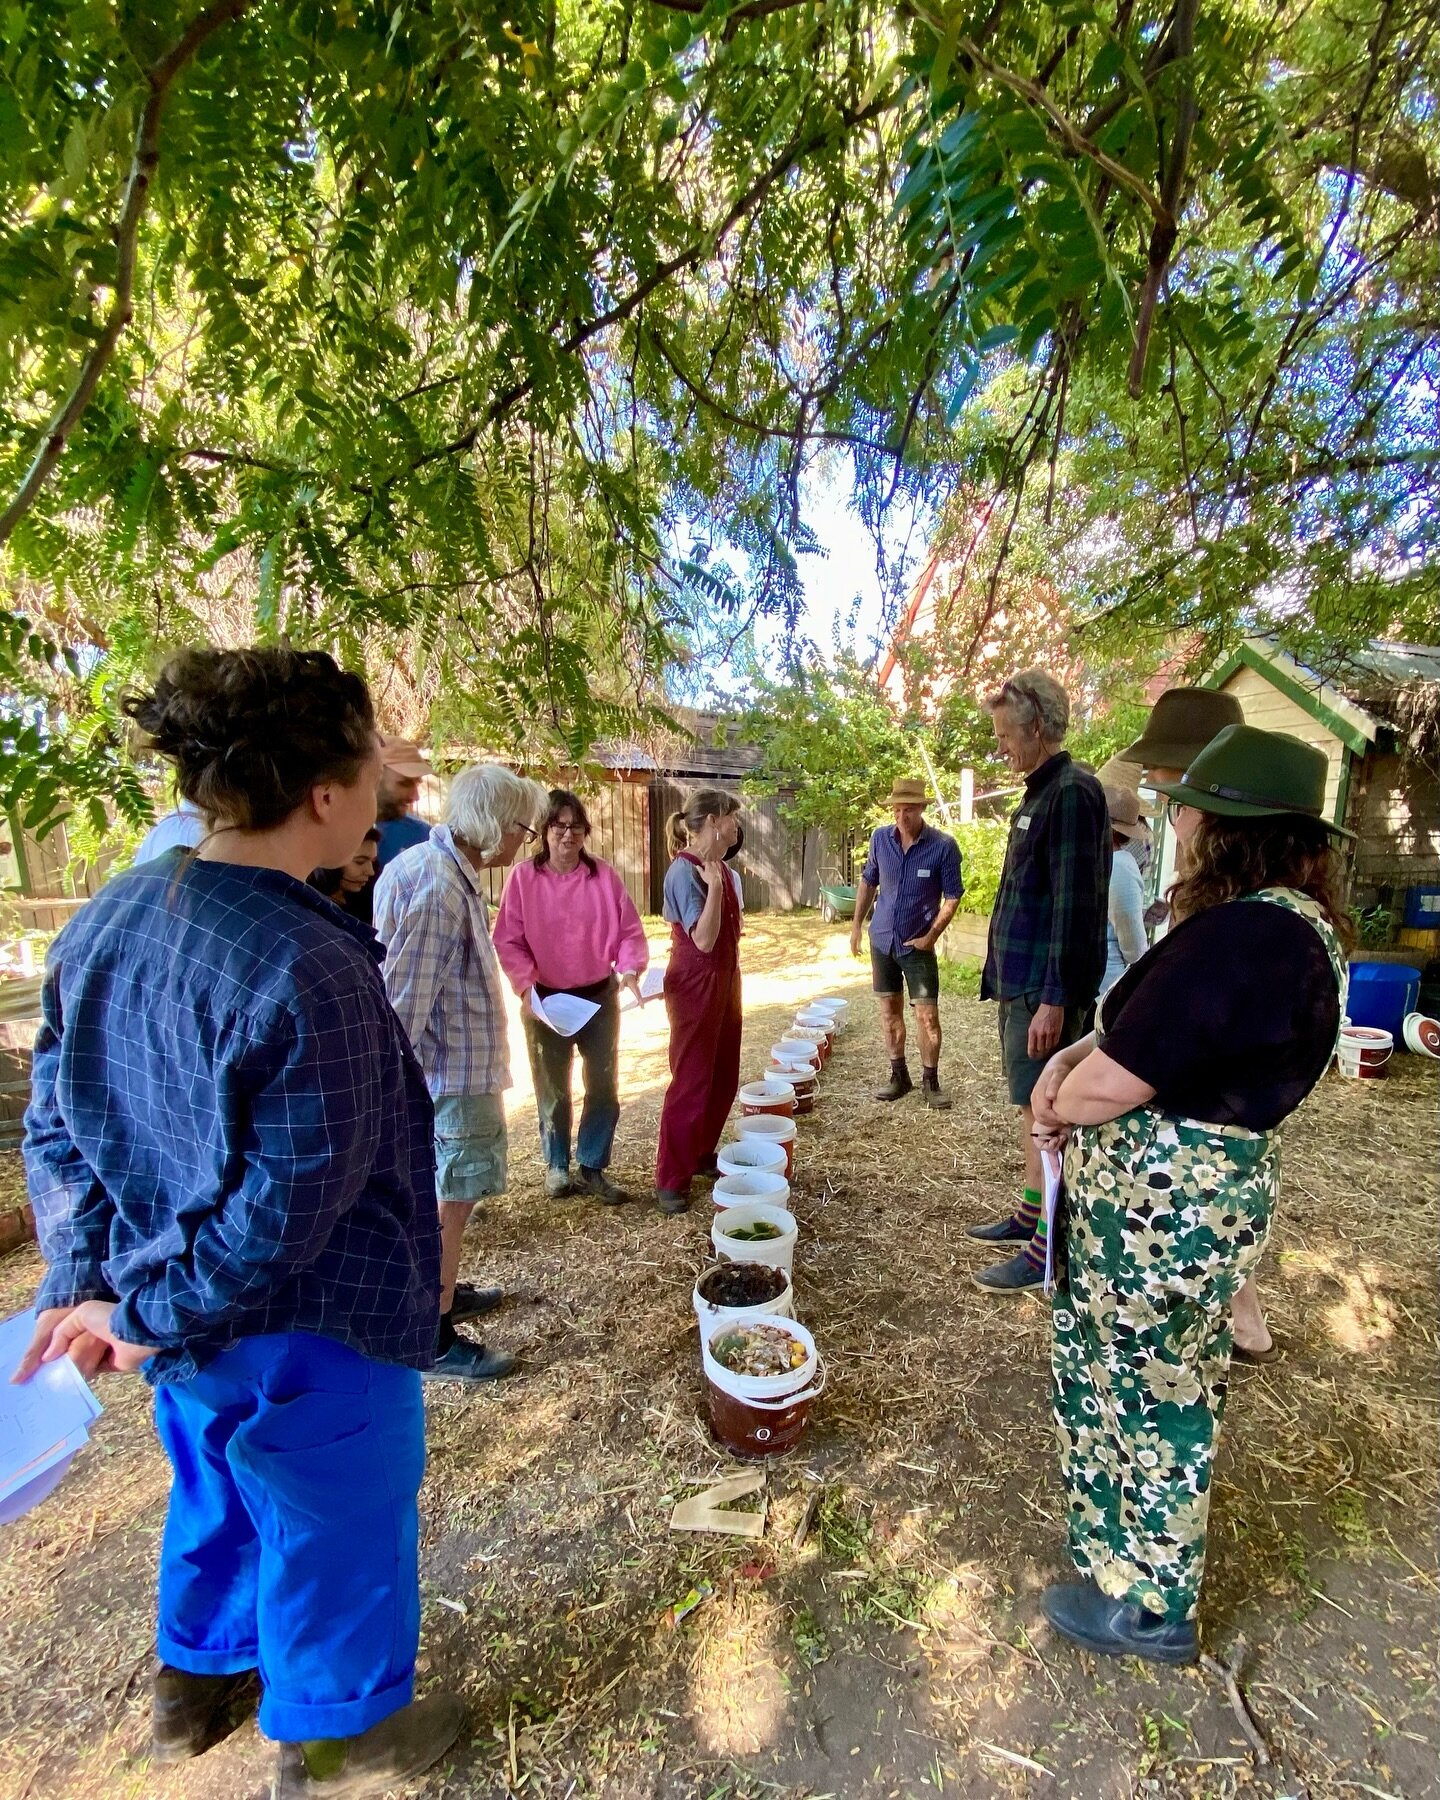 Compost training under way this morn. Hands on learning about how to analyse Carbon:Nitrogen ratios, as a small part of understanding the composting process. 
This workshop booked out, another one schedule for April, book now to reserve your place an